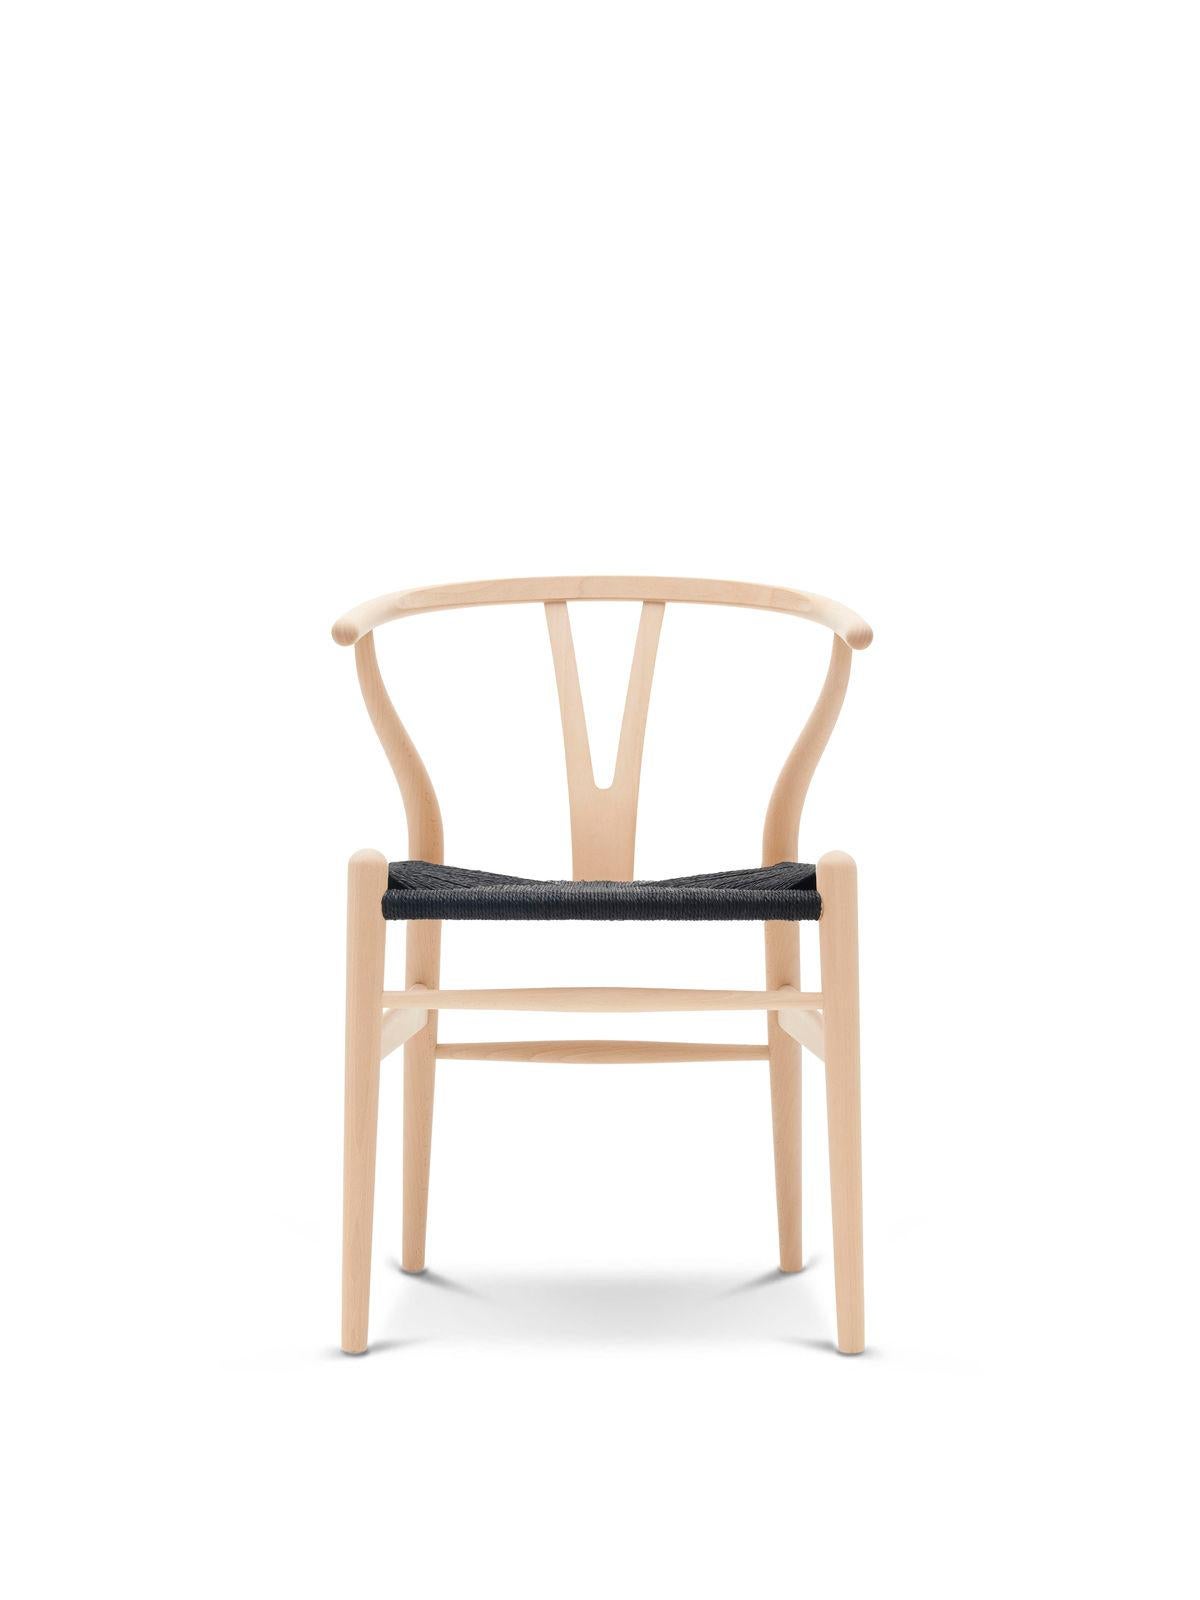 Woodwork CH24 Wishbone Chair, Classic Wood Finishes, by Hans J. Wegner